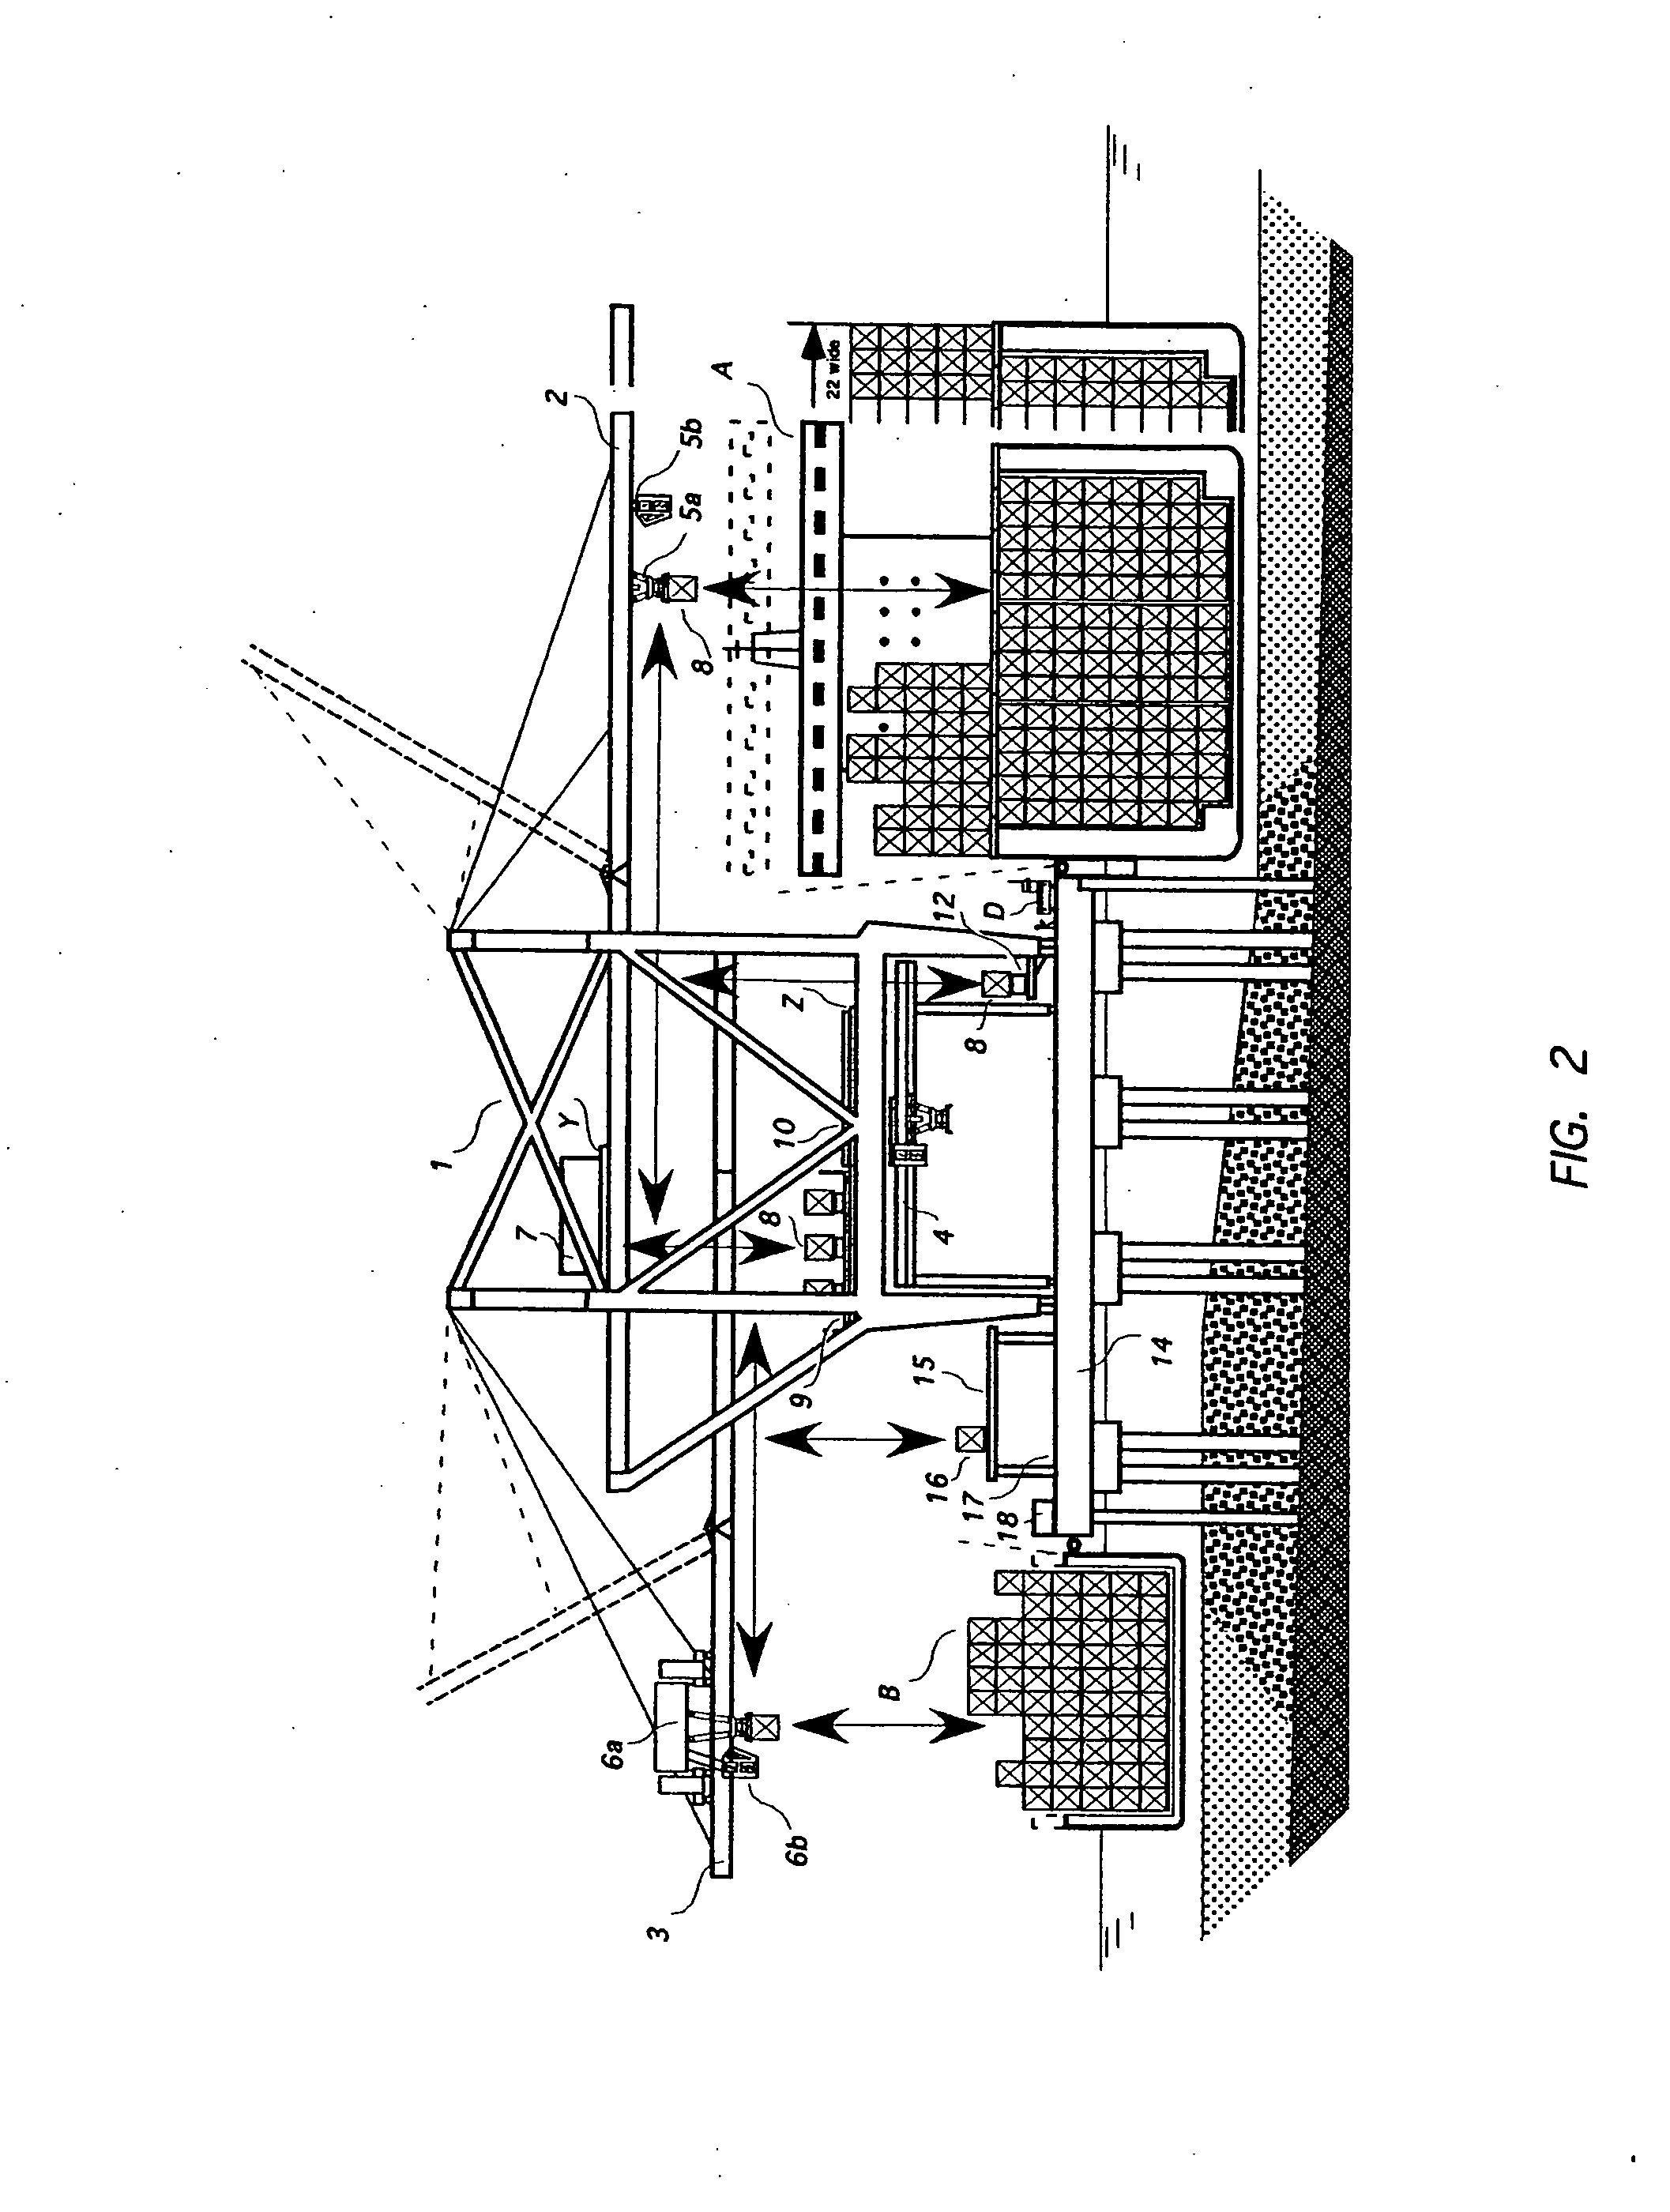 Container crane apparatus and method for container security screening during direct transshipment between transportation modes